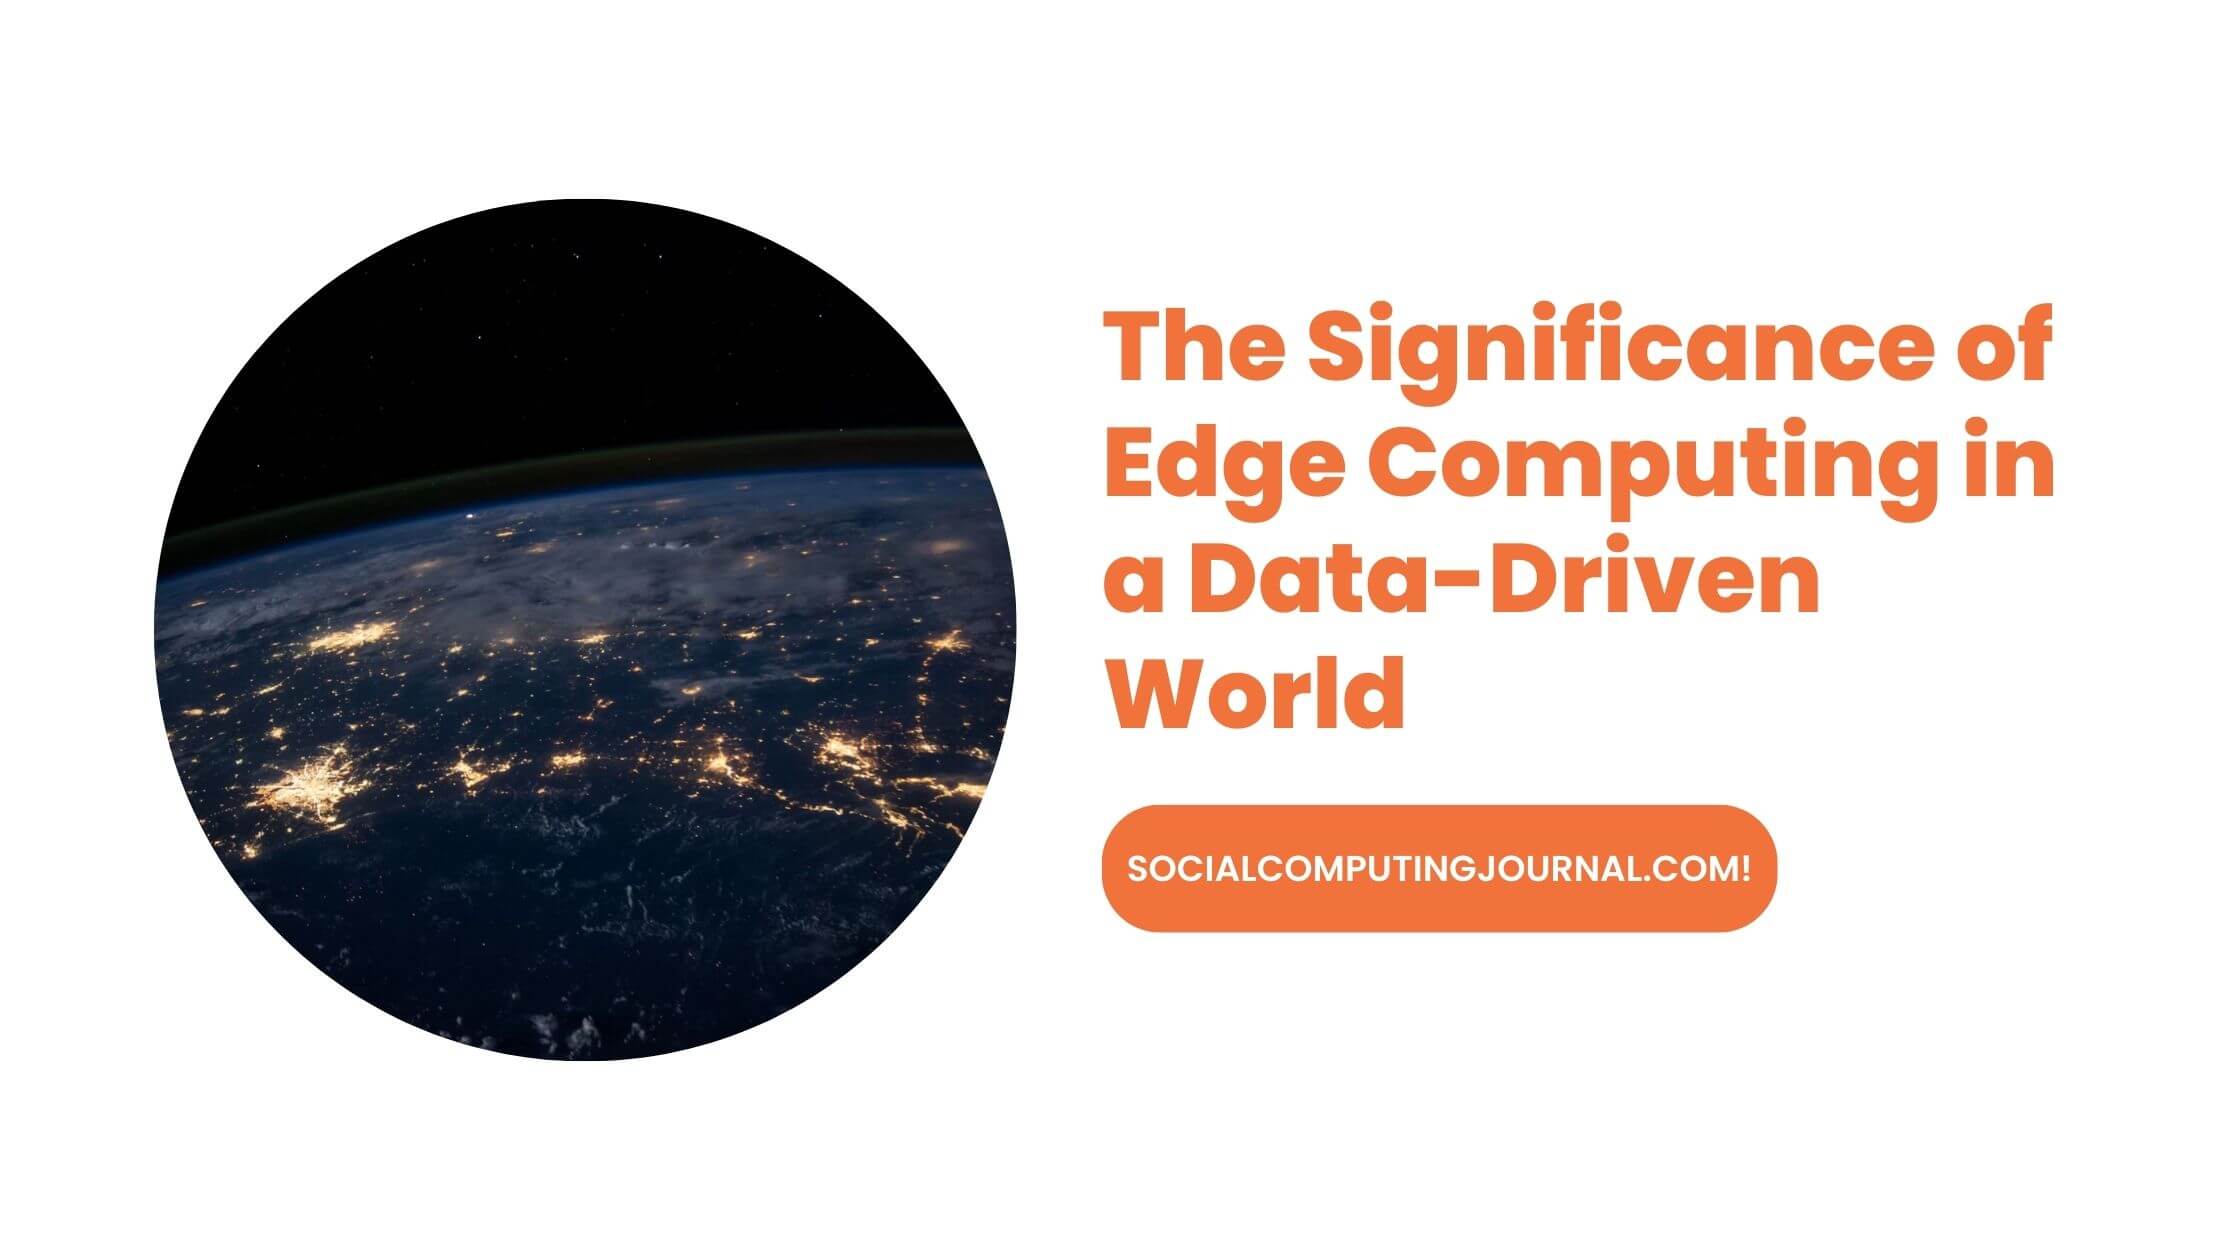 The Significance of Edge Computing in a Data-Driven World